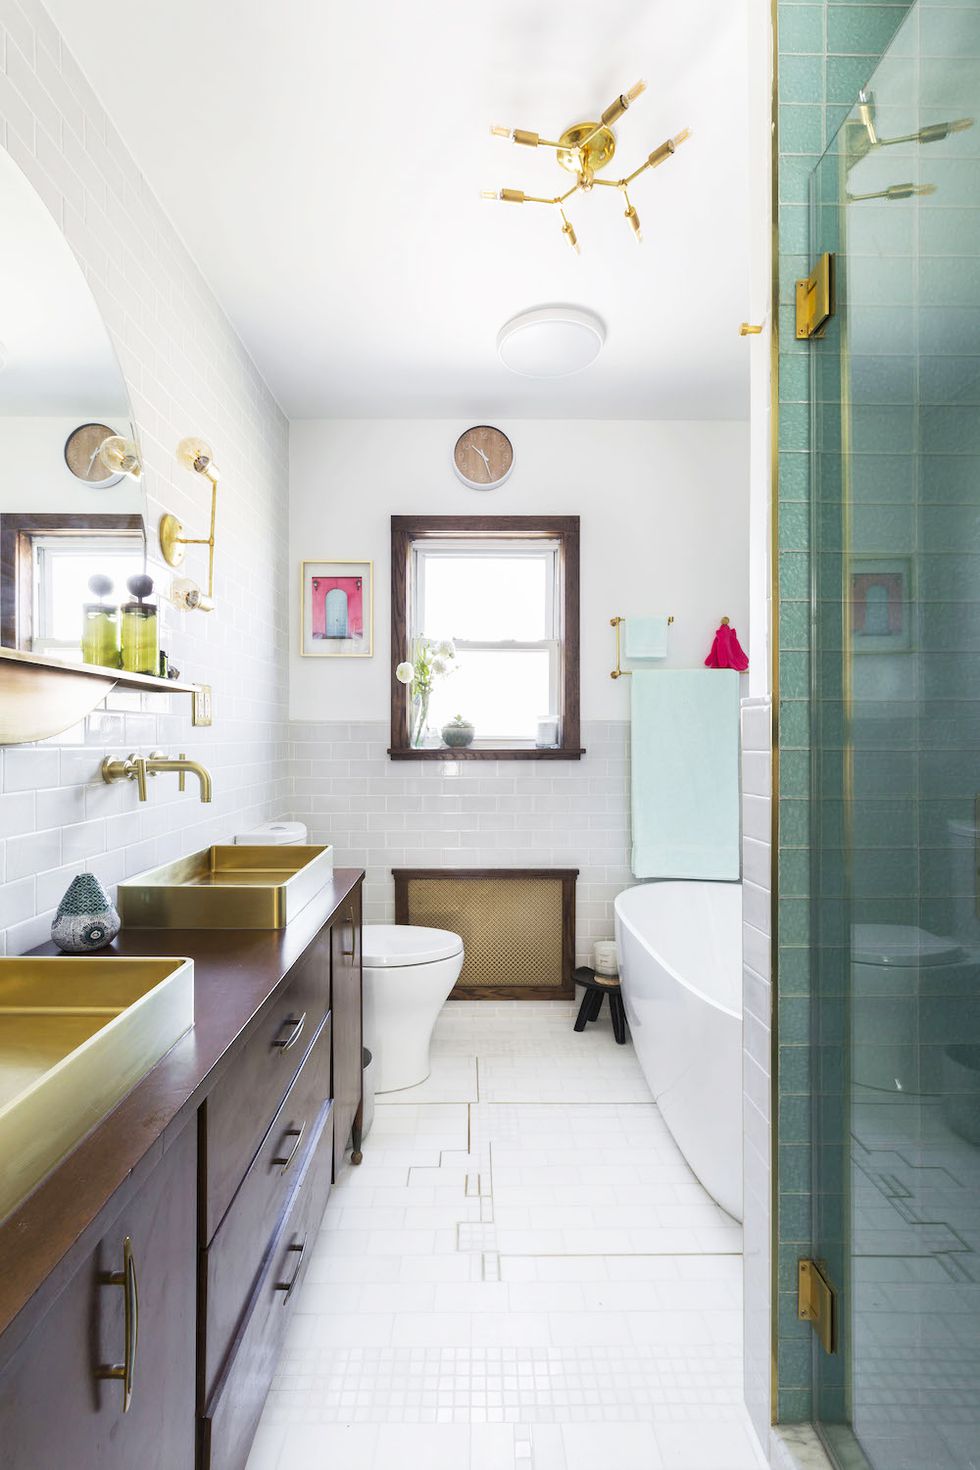 An Outdated 1920s Bathroom Just Got a Major Facelift - Op Copy